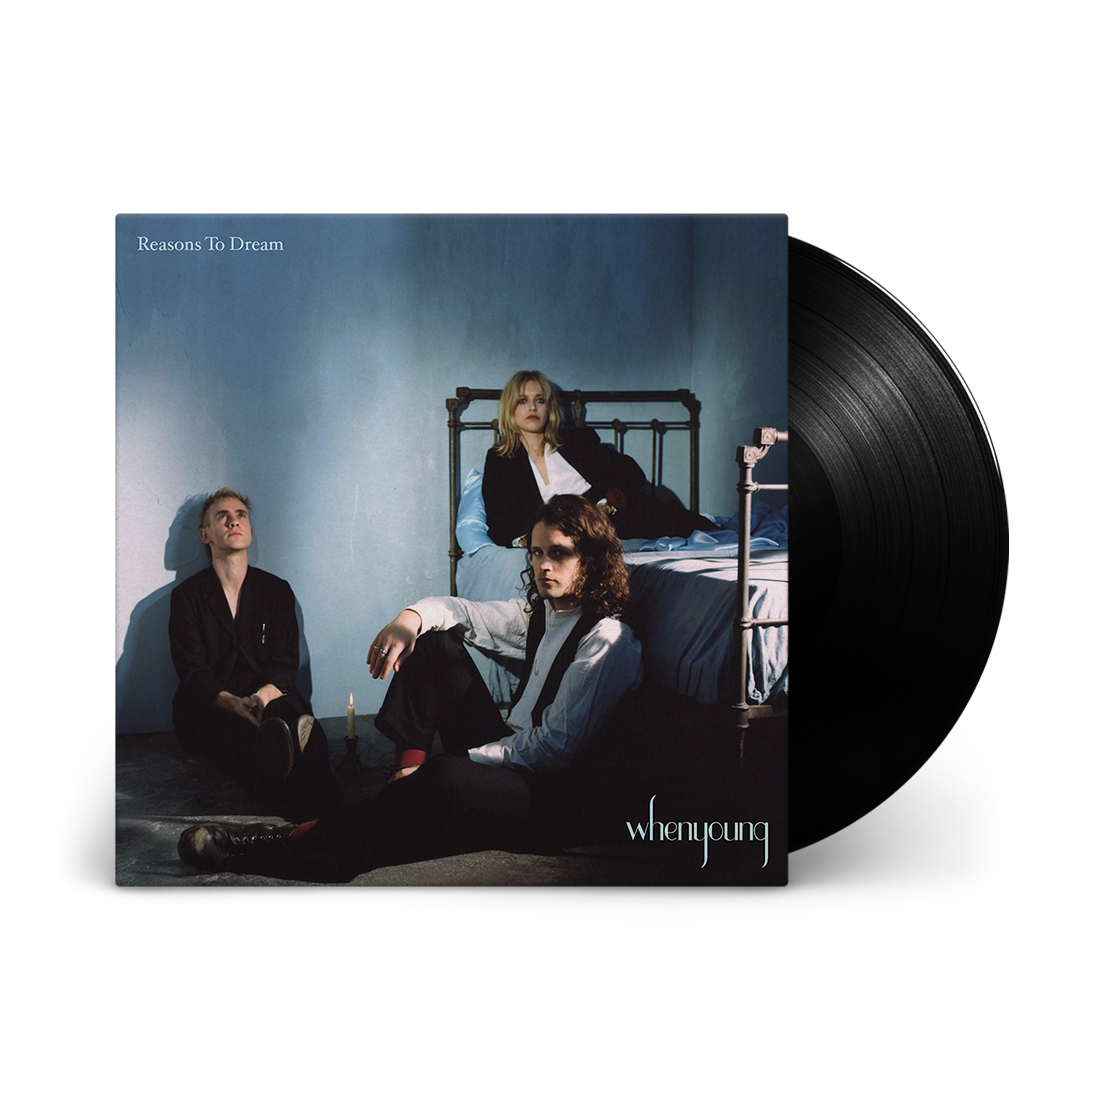 whenyoung - Reasons To Dream: Vinyl LP